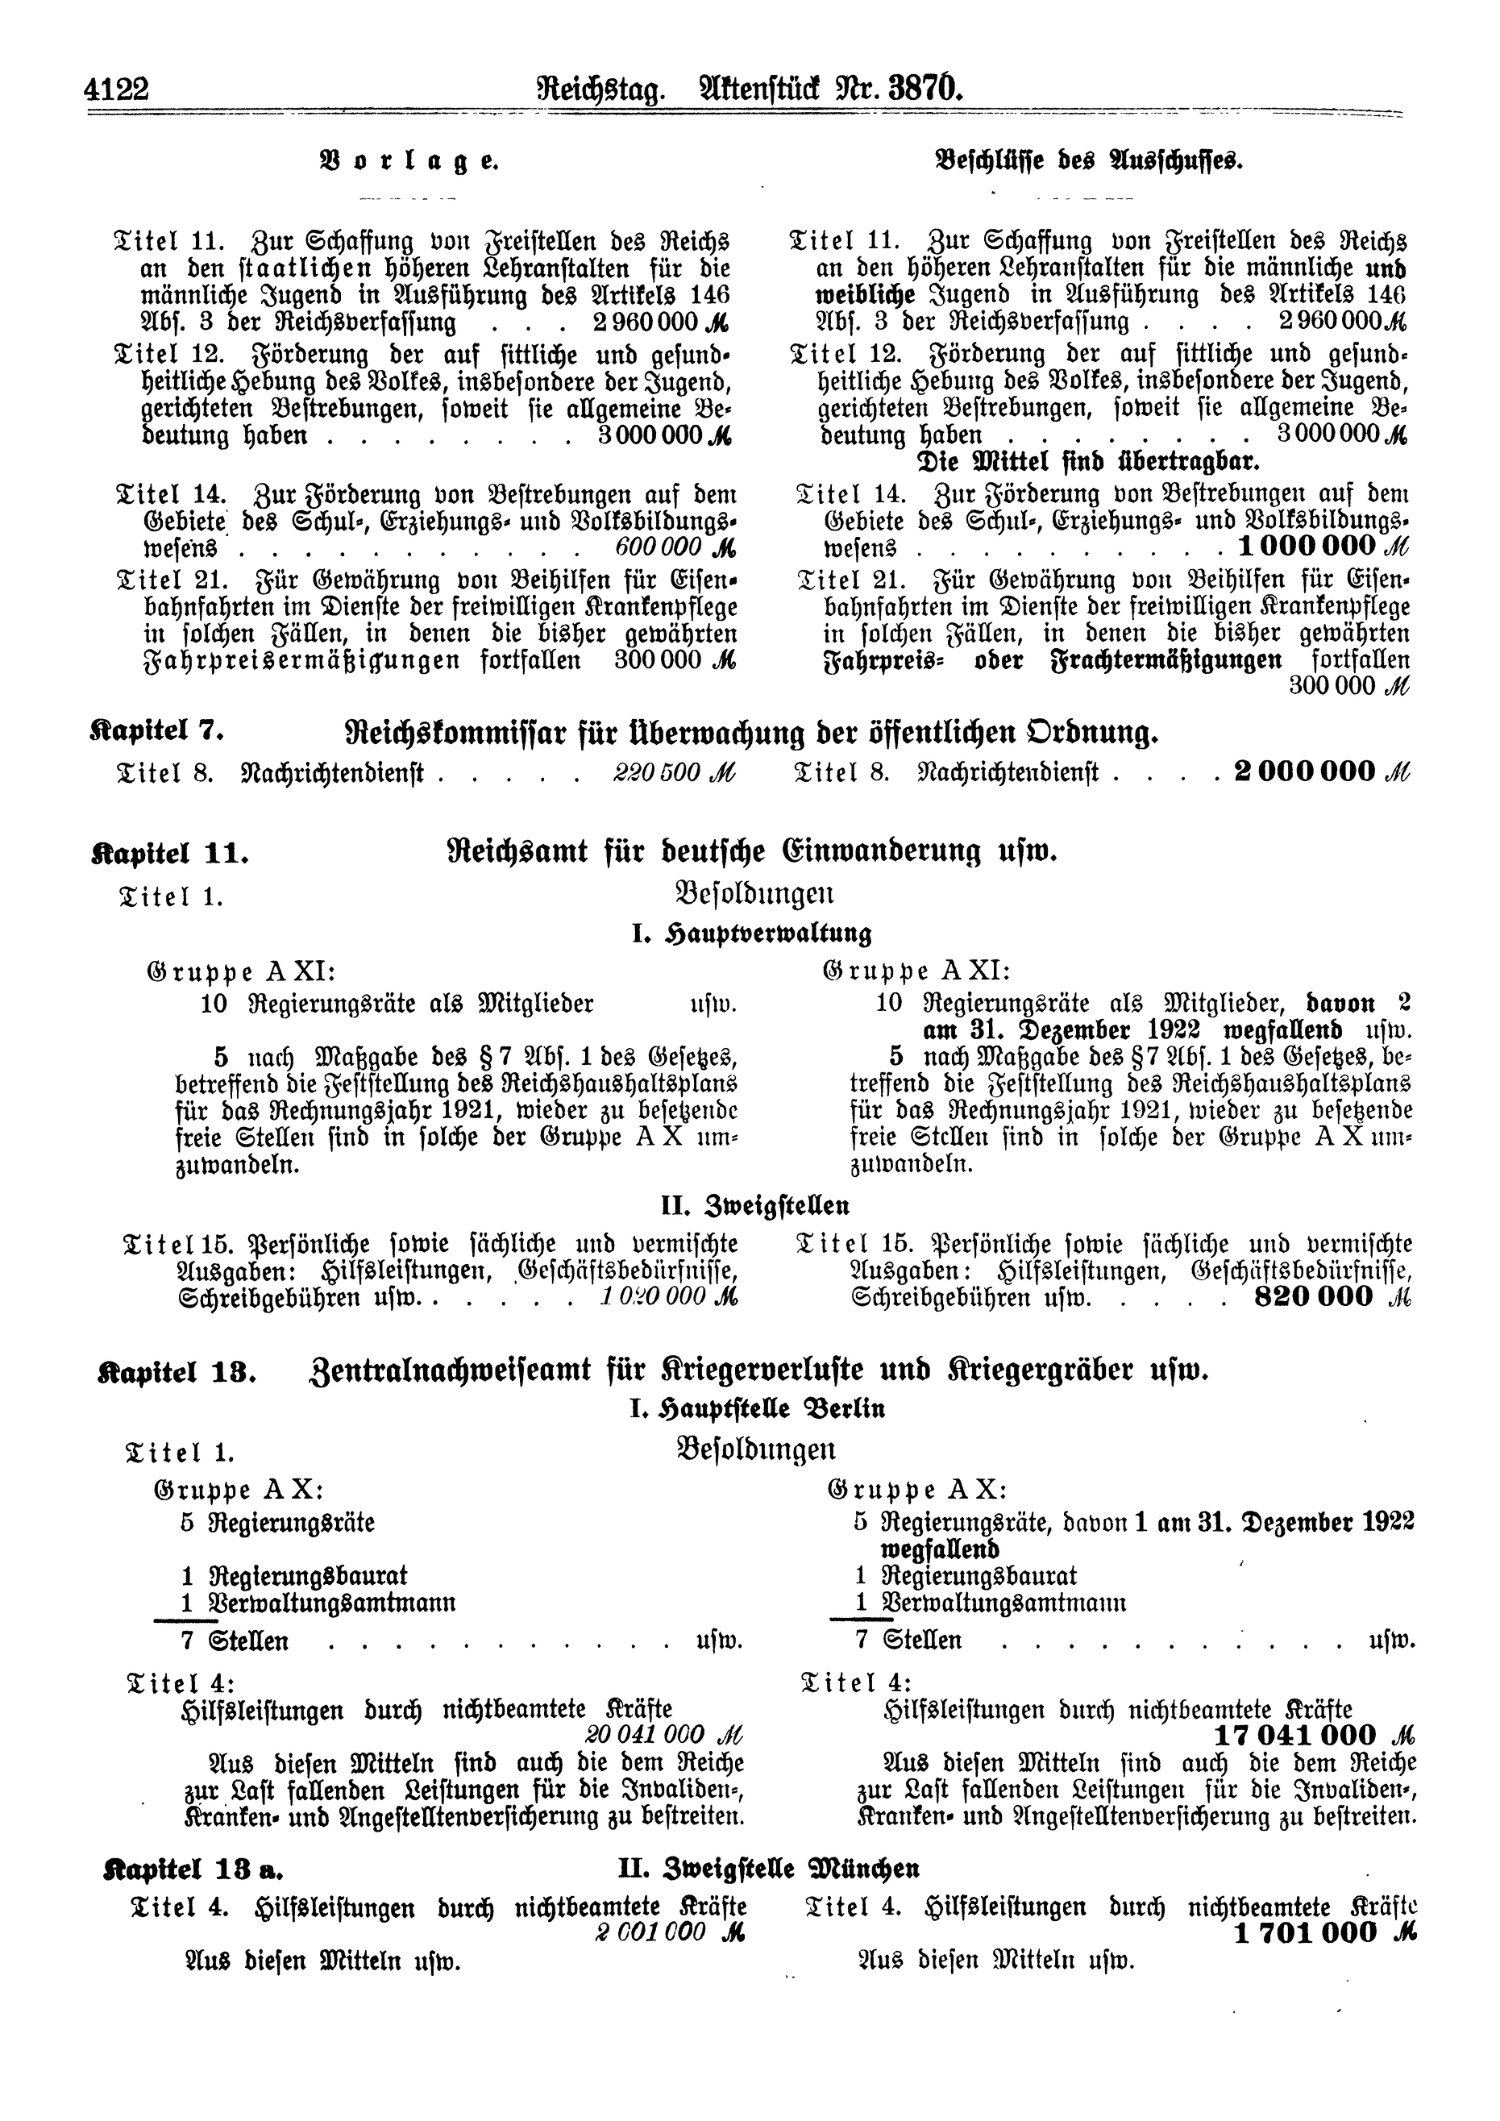 Scan of page 4122